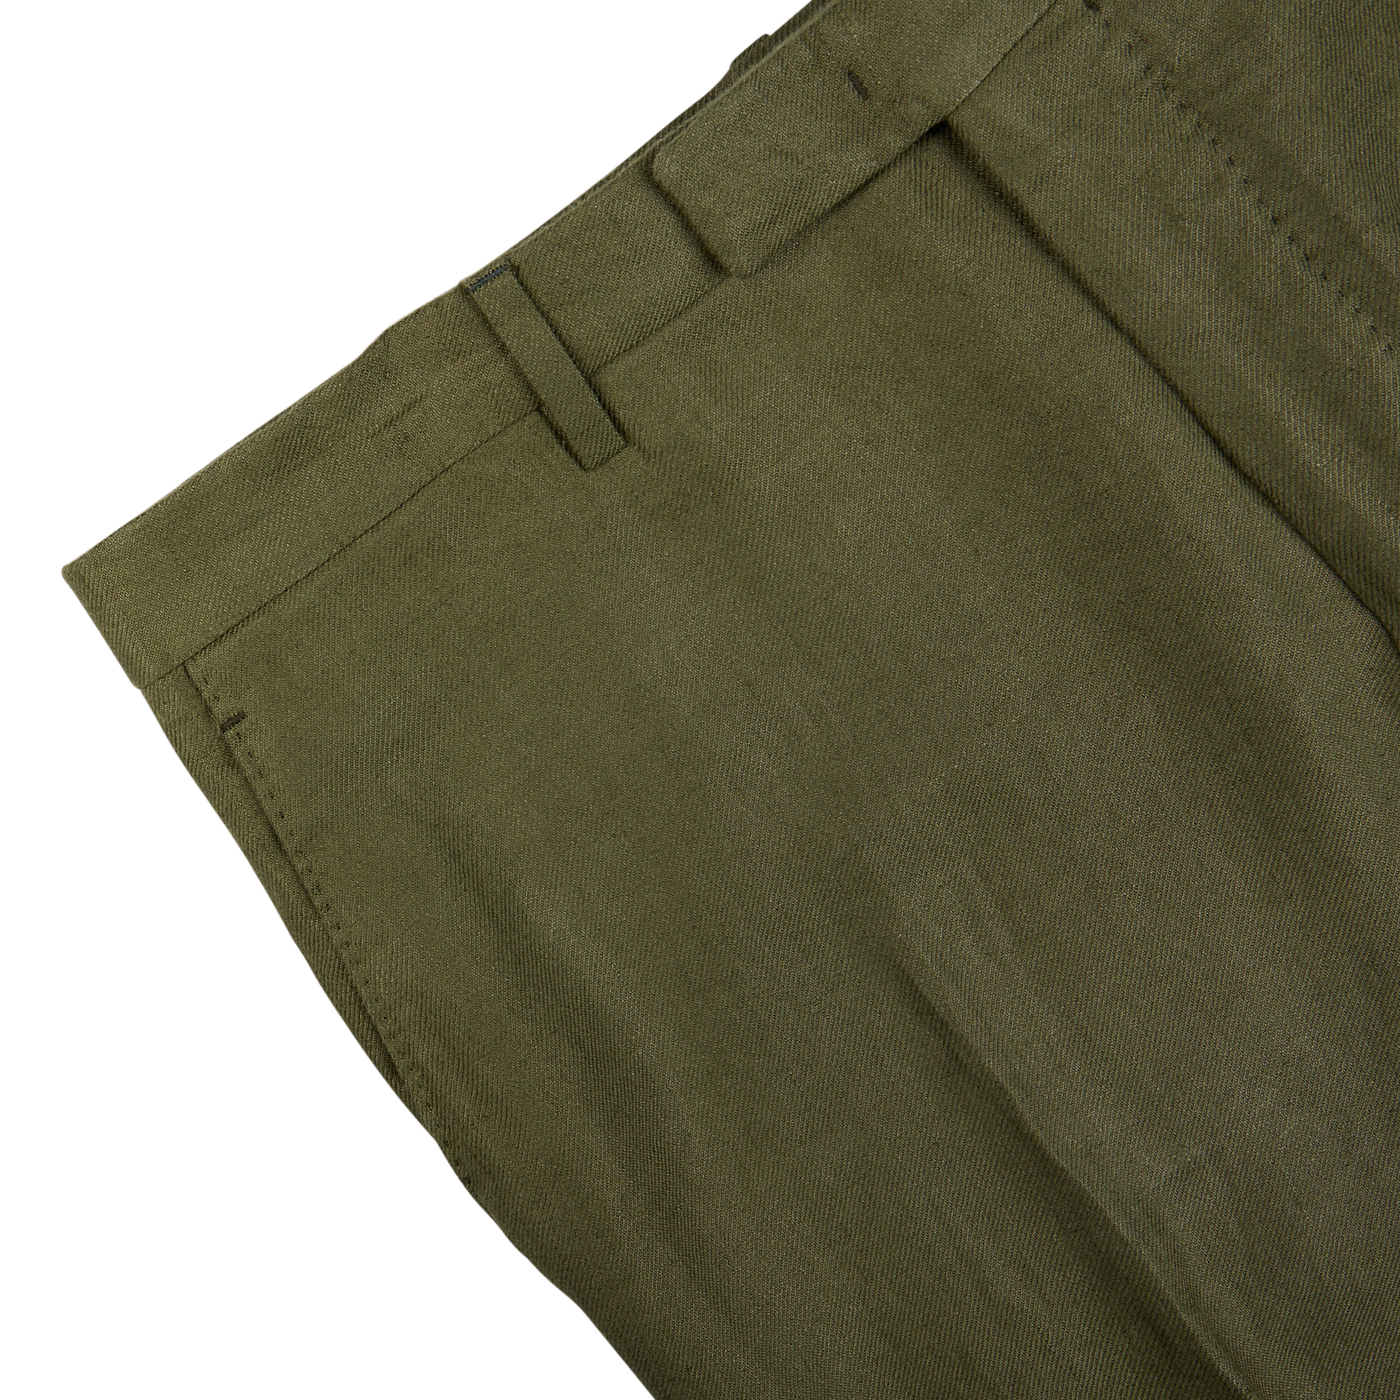 Boglioli Green Washed Irish Linen Trousers with visible waistband and stitching detail on a white background.